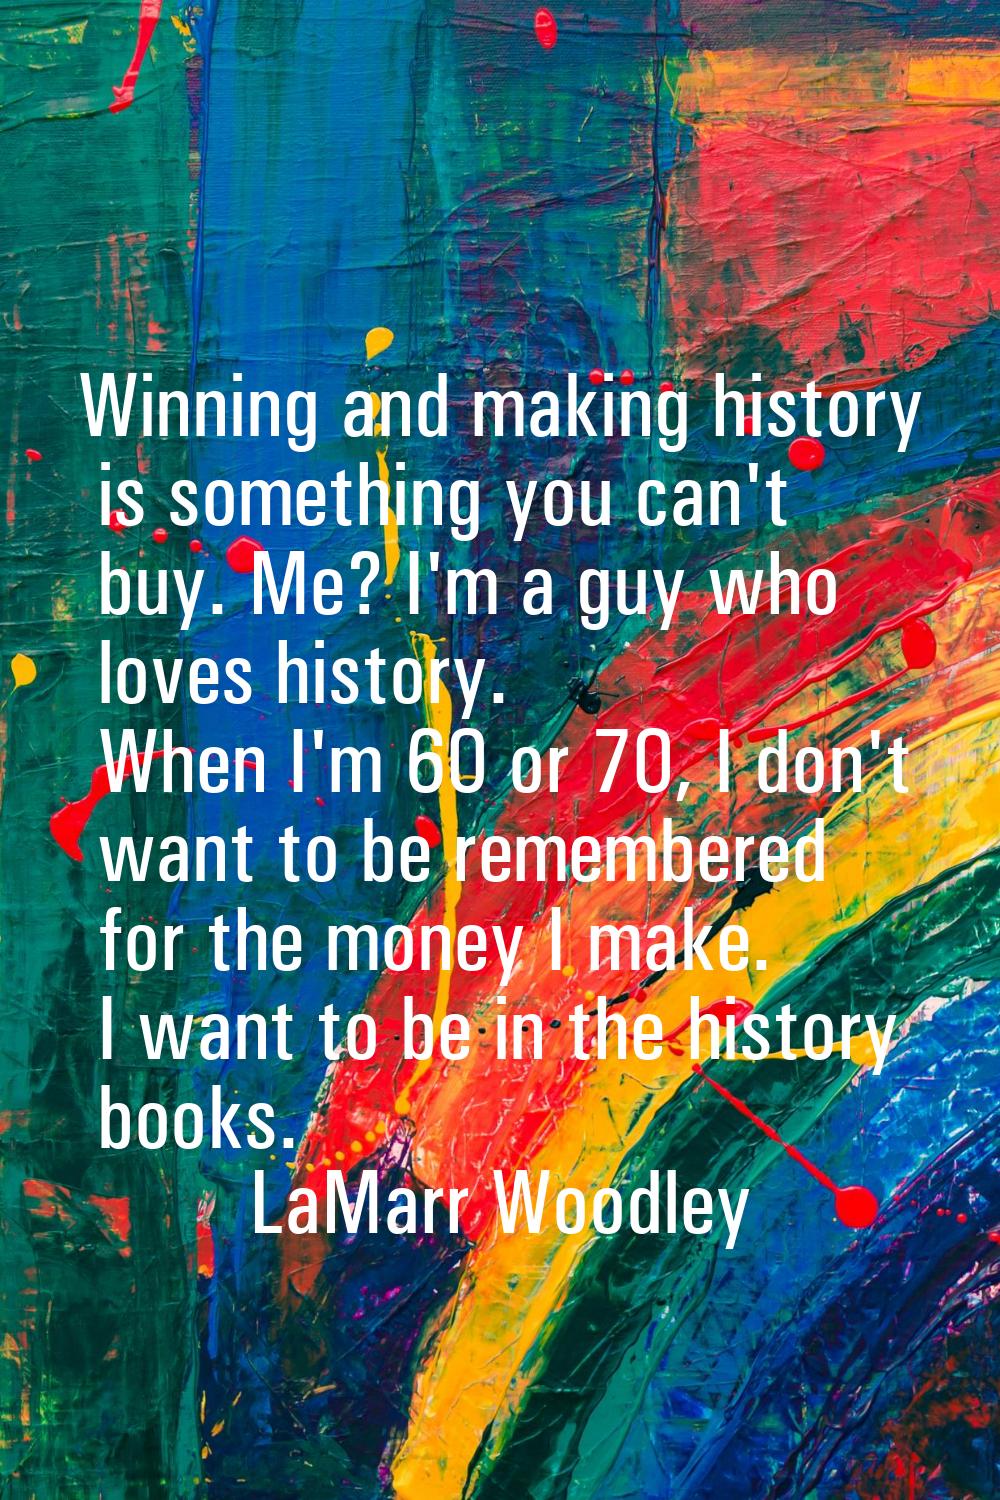 Winning and making history is something you can't buy. Me? I'm a guy who loves history. When I'm 60